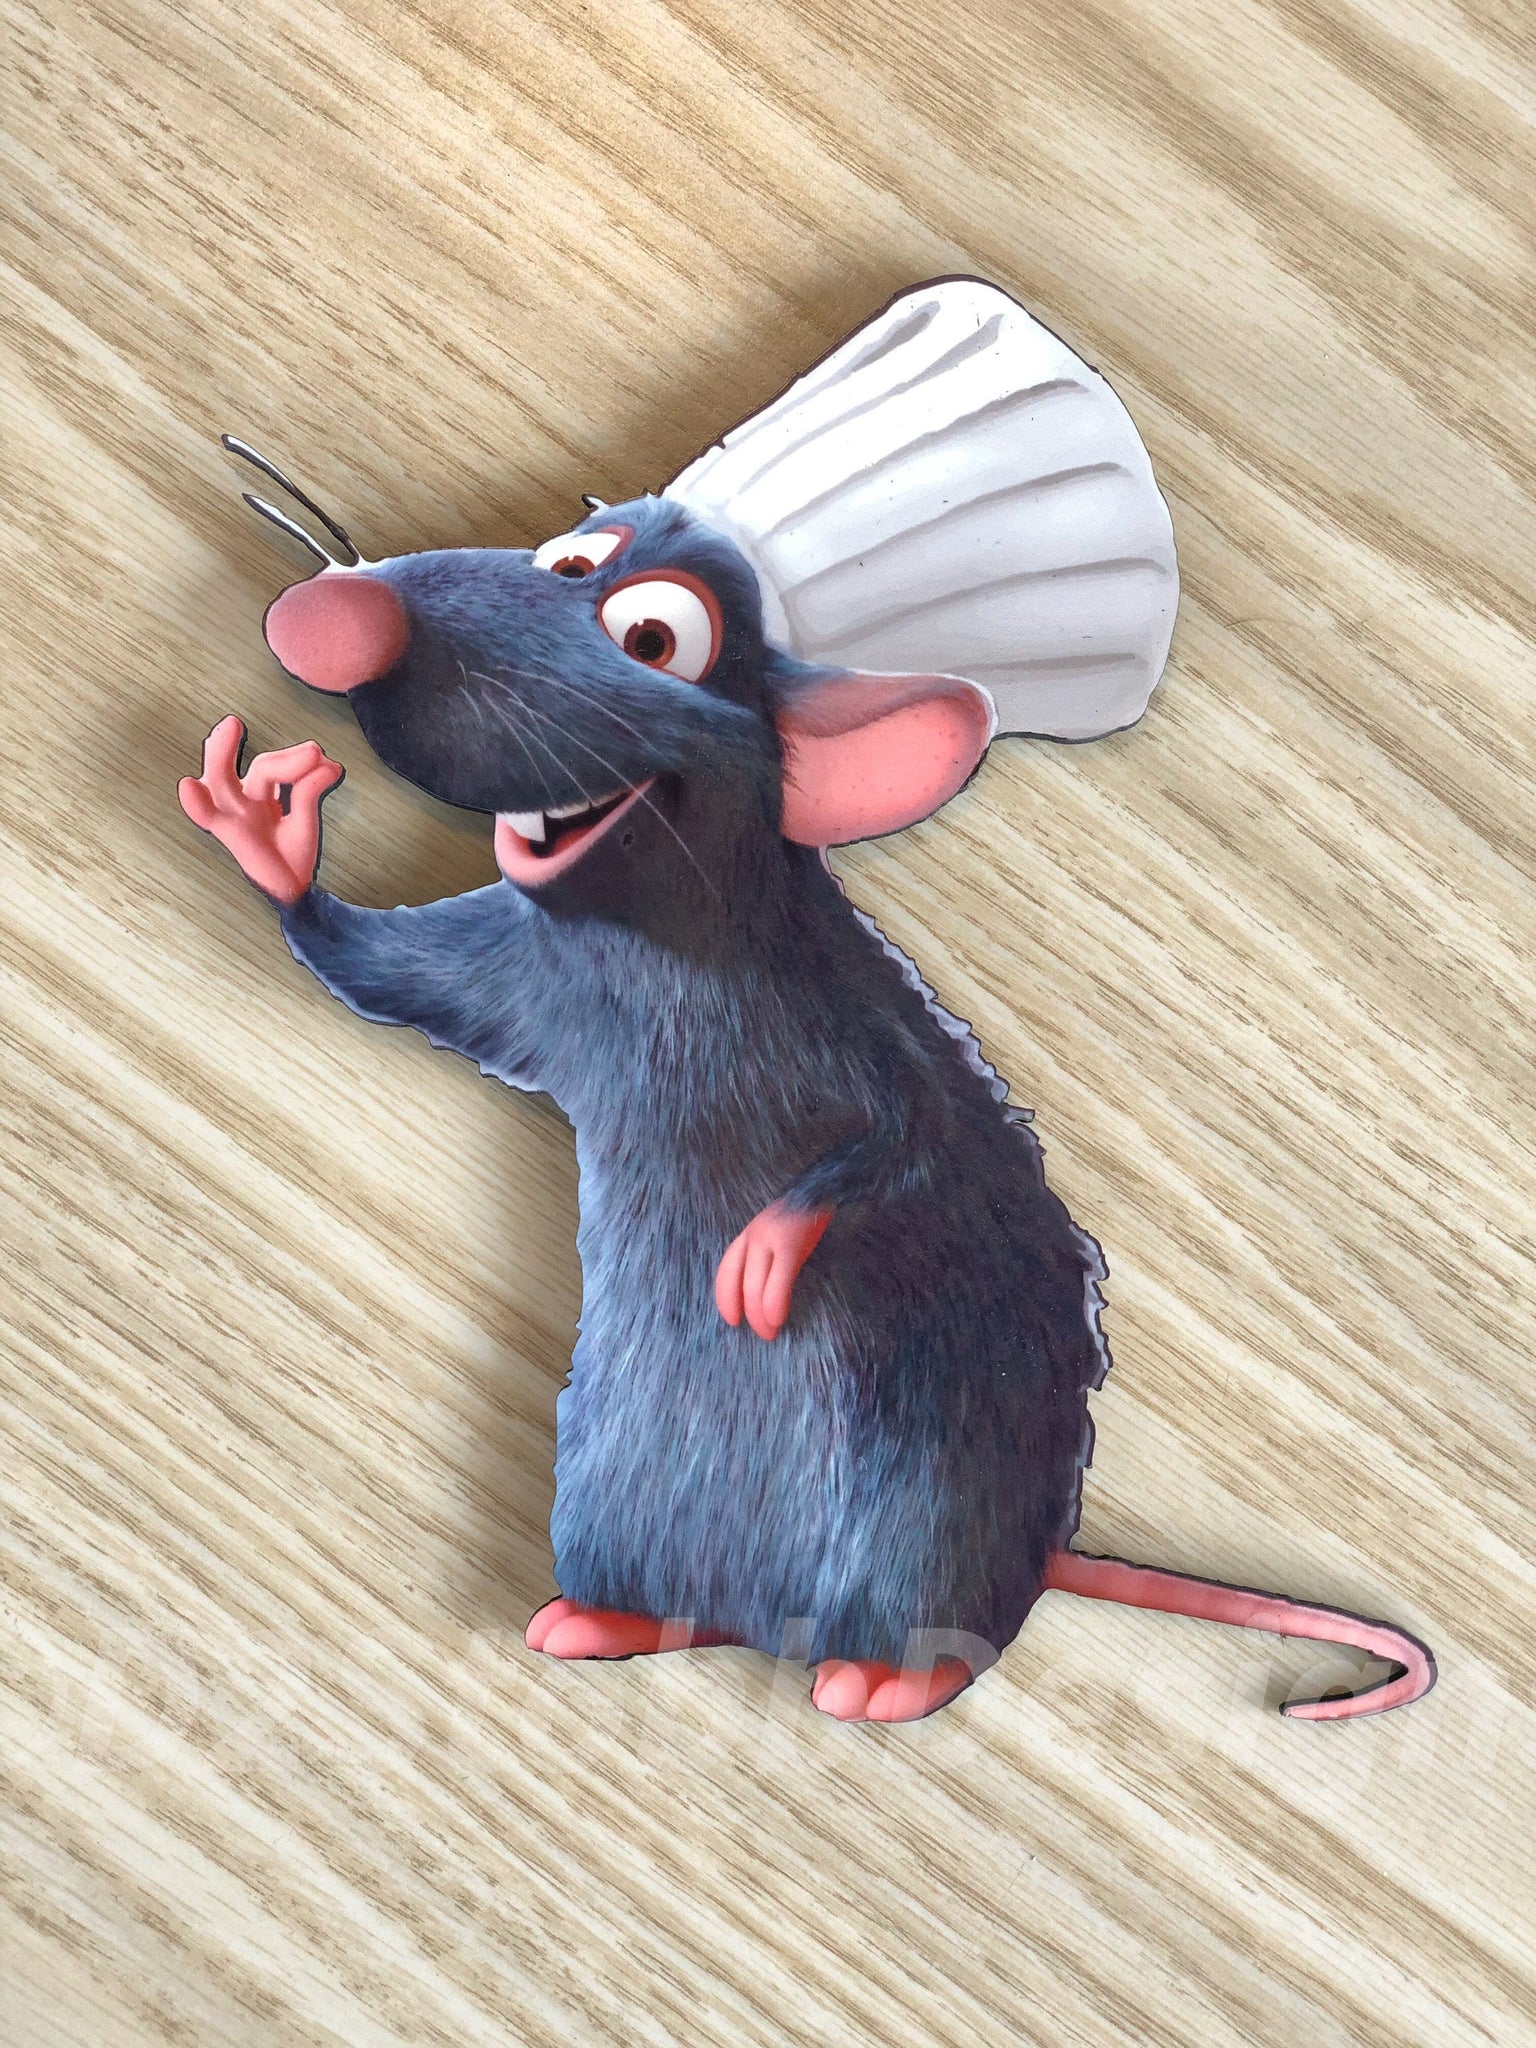 remy ratatouille cooking